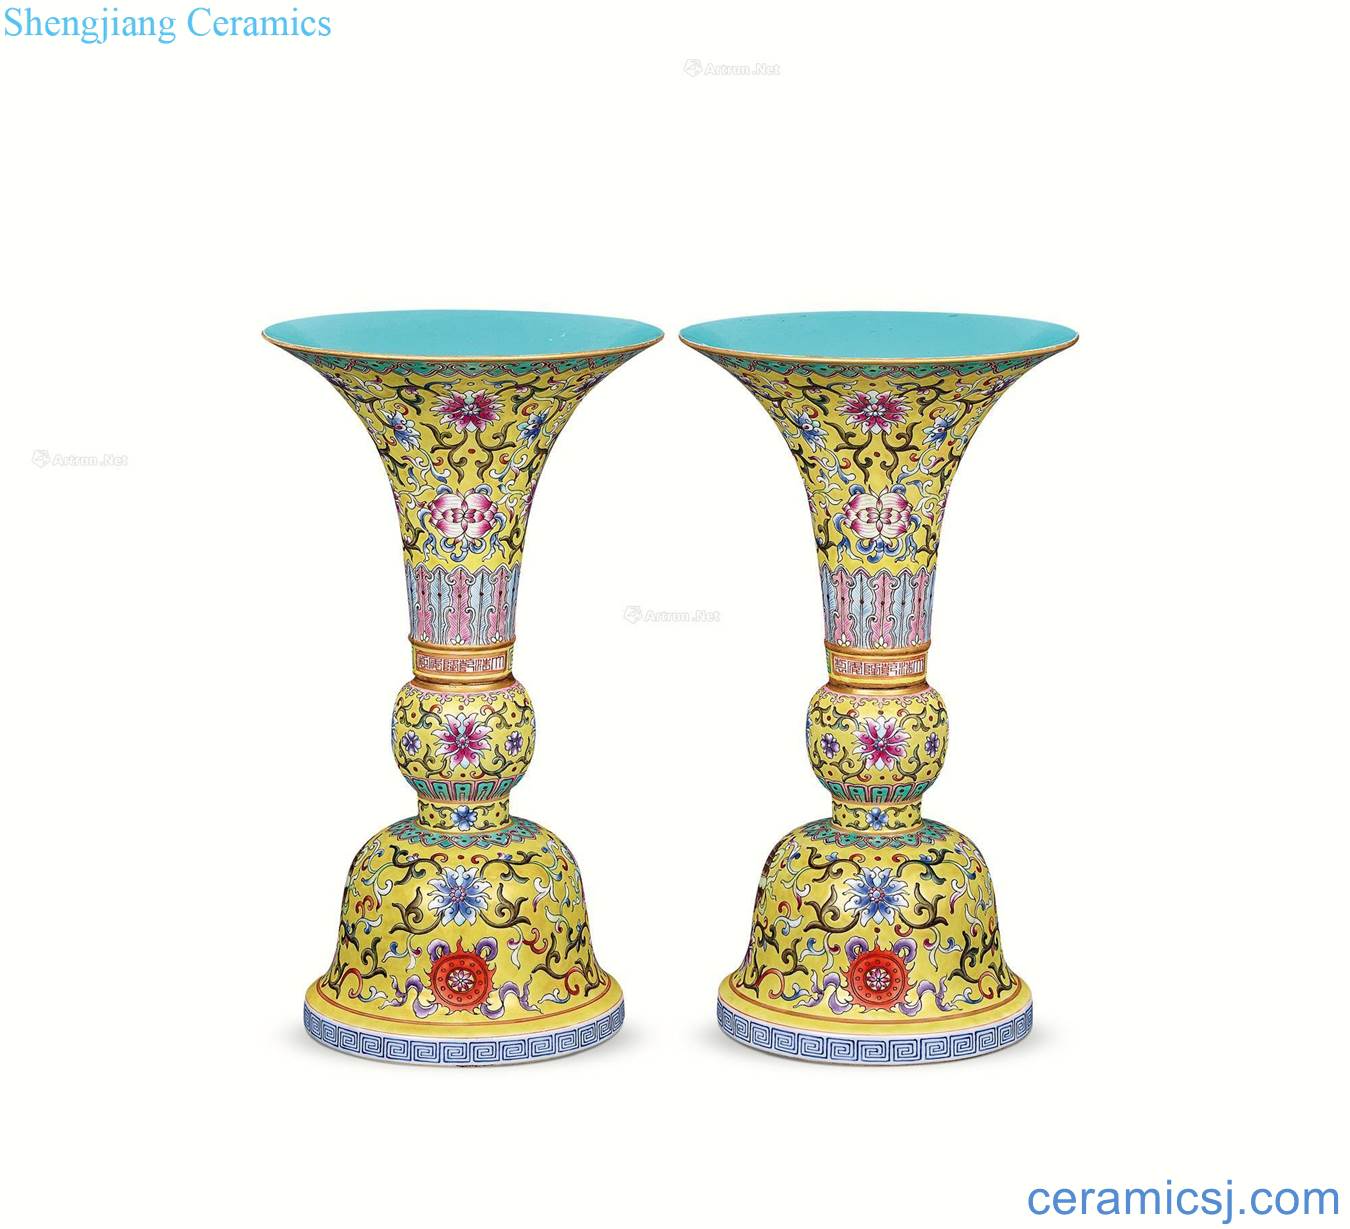 In the qing dynasty To pastel yellow flowers with a sweet vase with (a)